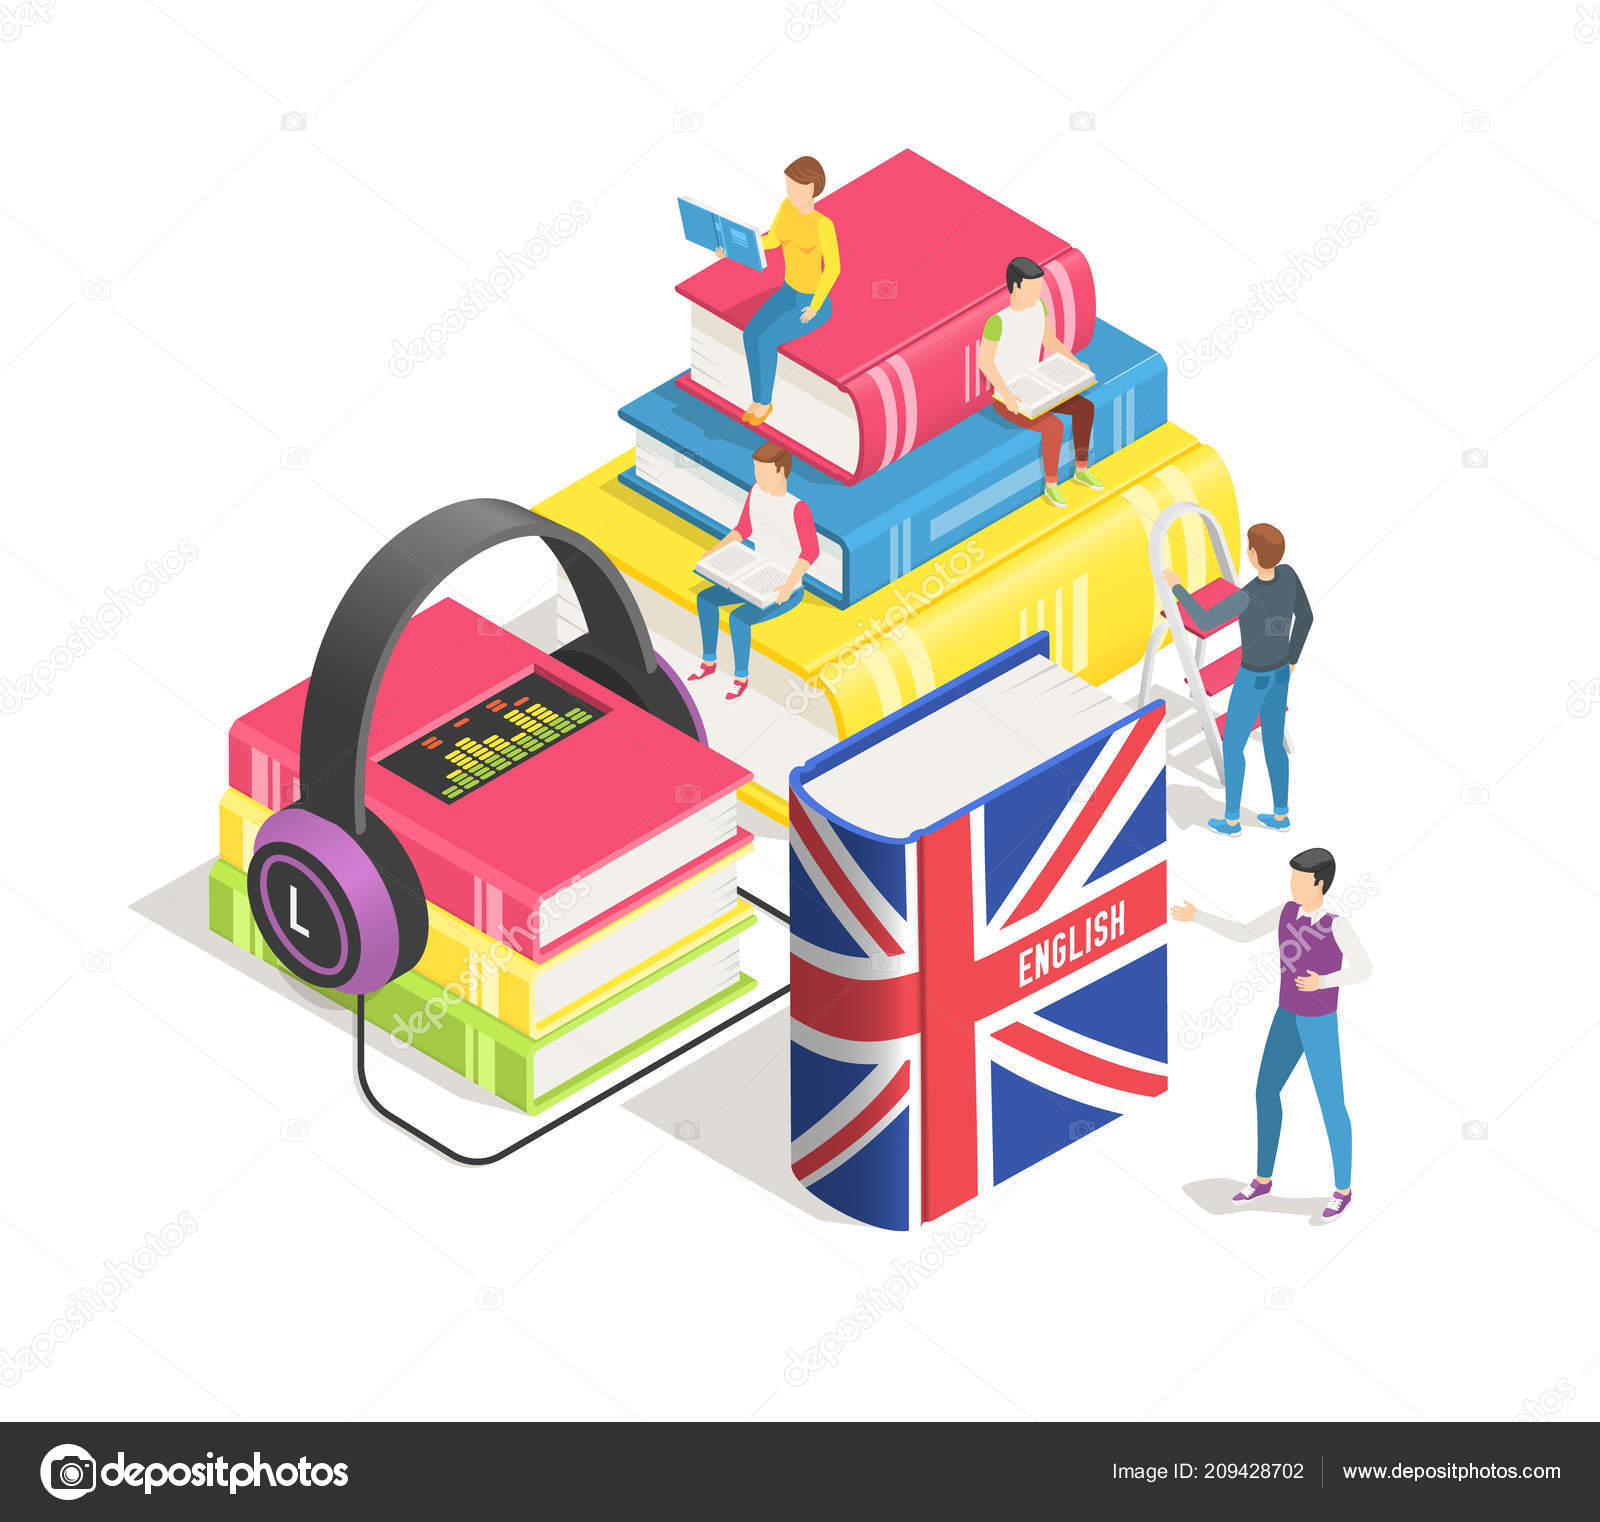 209428702　languages　dictionary,　background　Stock　german　concept.　textbooks.　vector　People　english　and　online.　french　by　Studying　spanish　Education　Vector　Learning　foreign